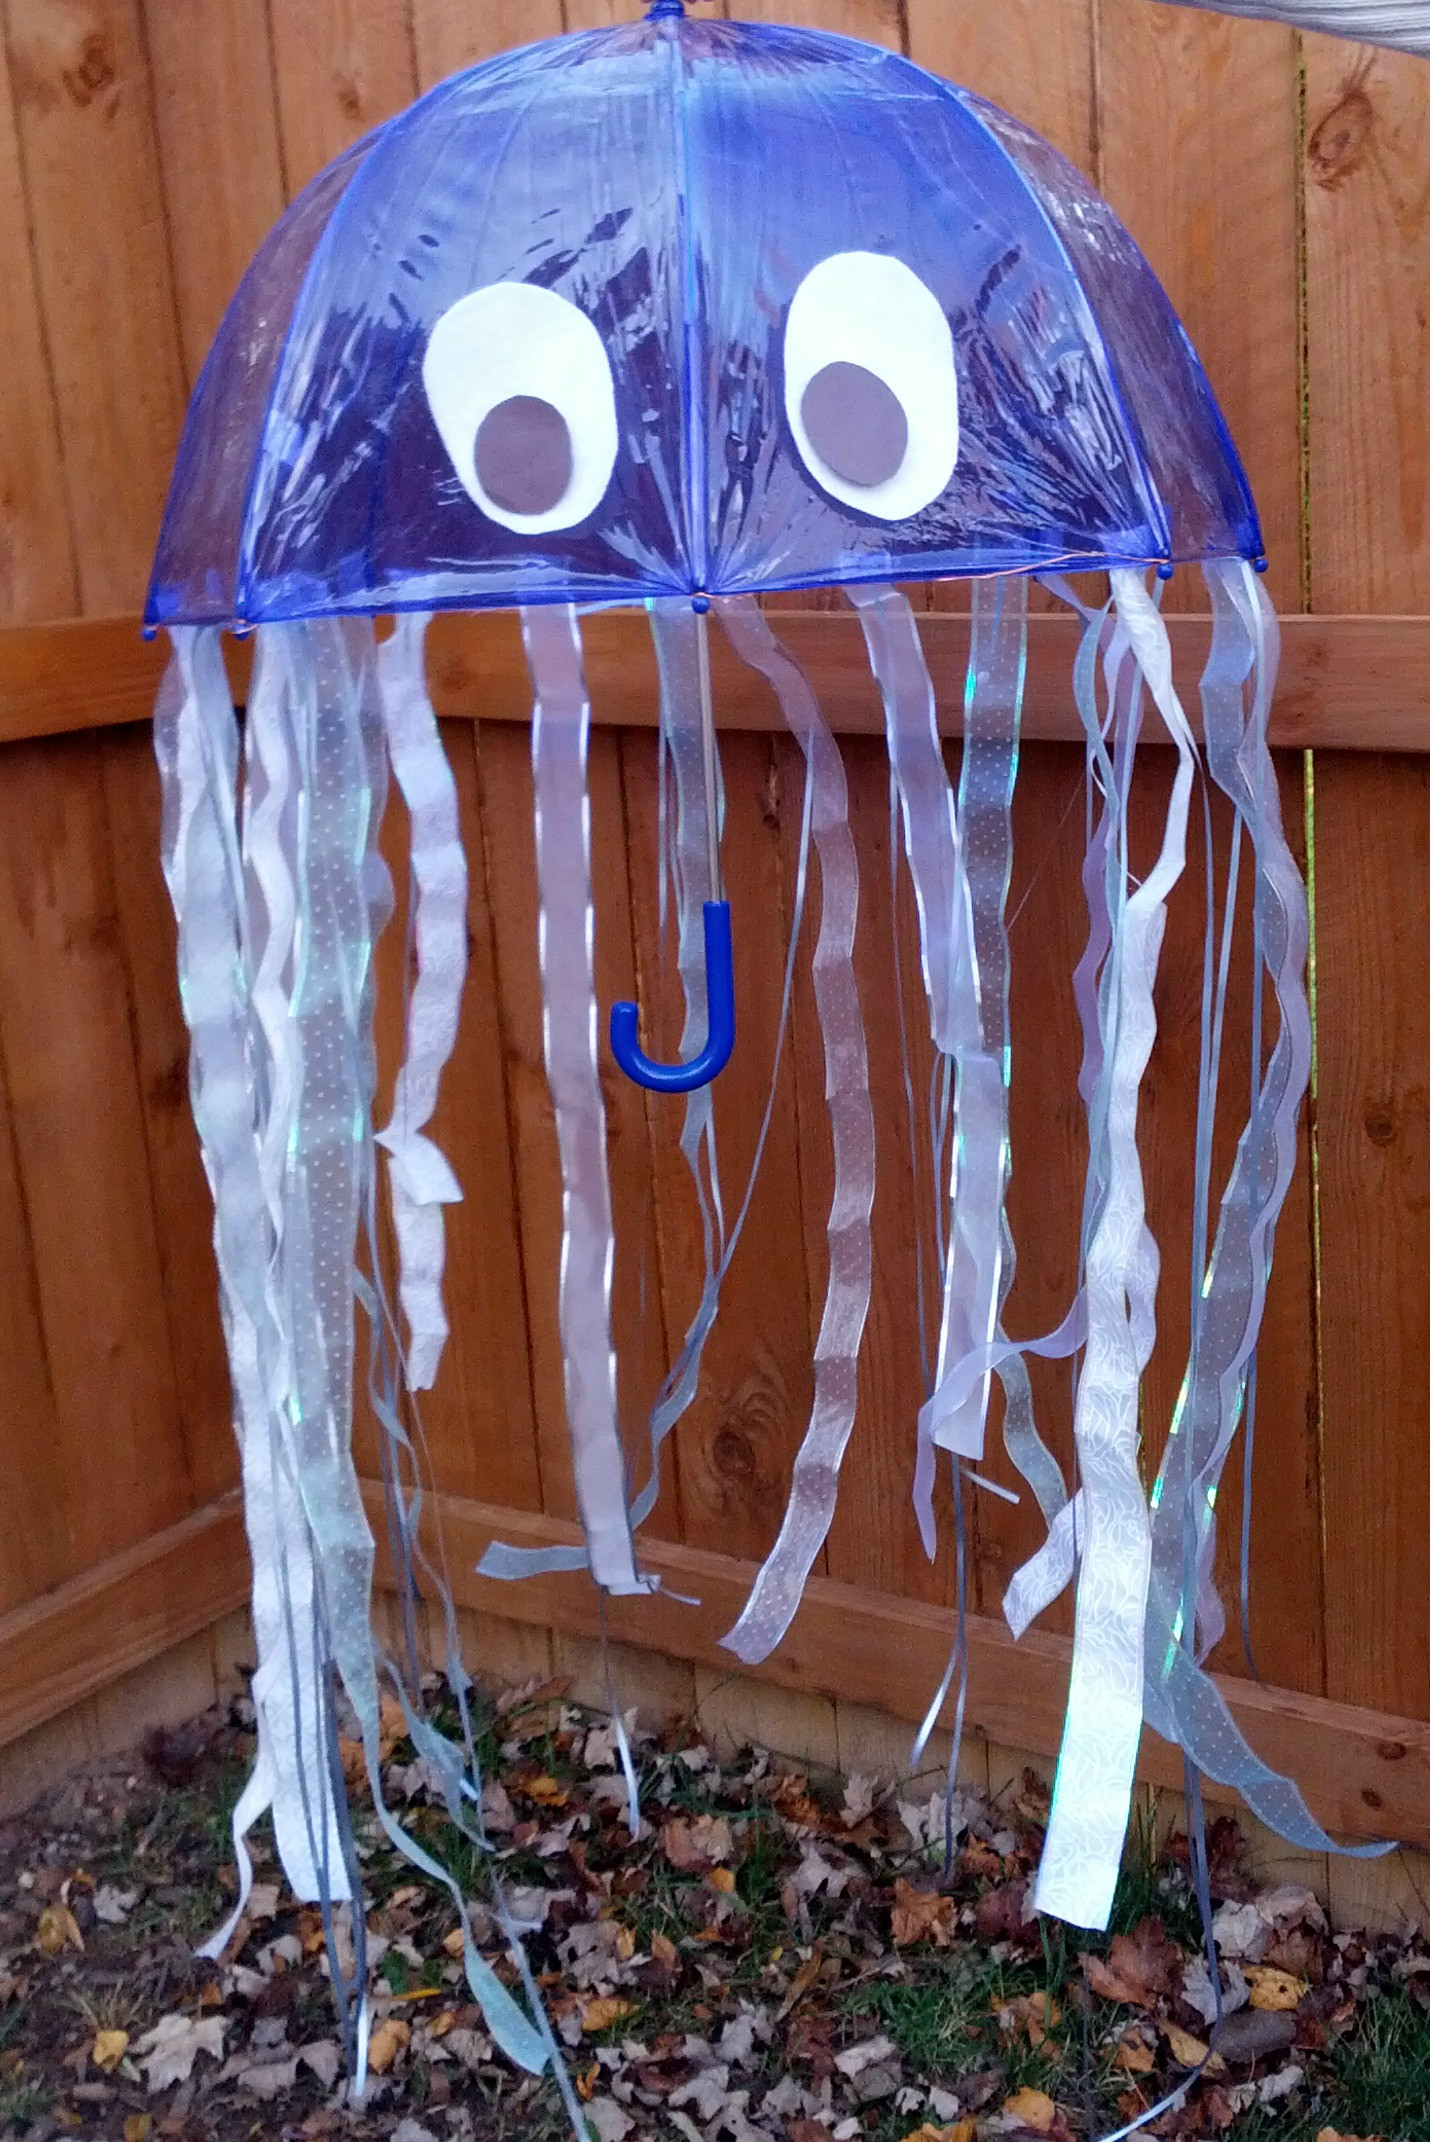 DIY Jellyfish Costumes
 Amazing DIY Jellyfish Costume Almost The Real Thing